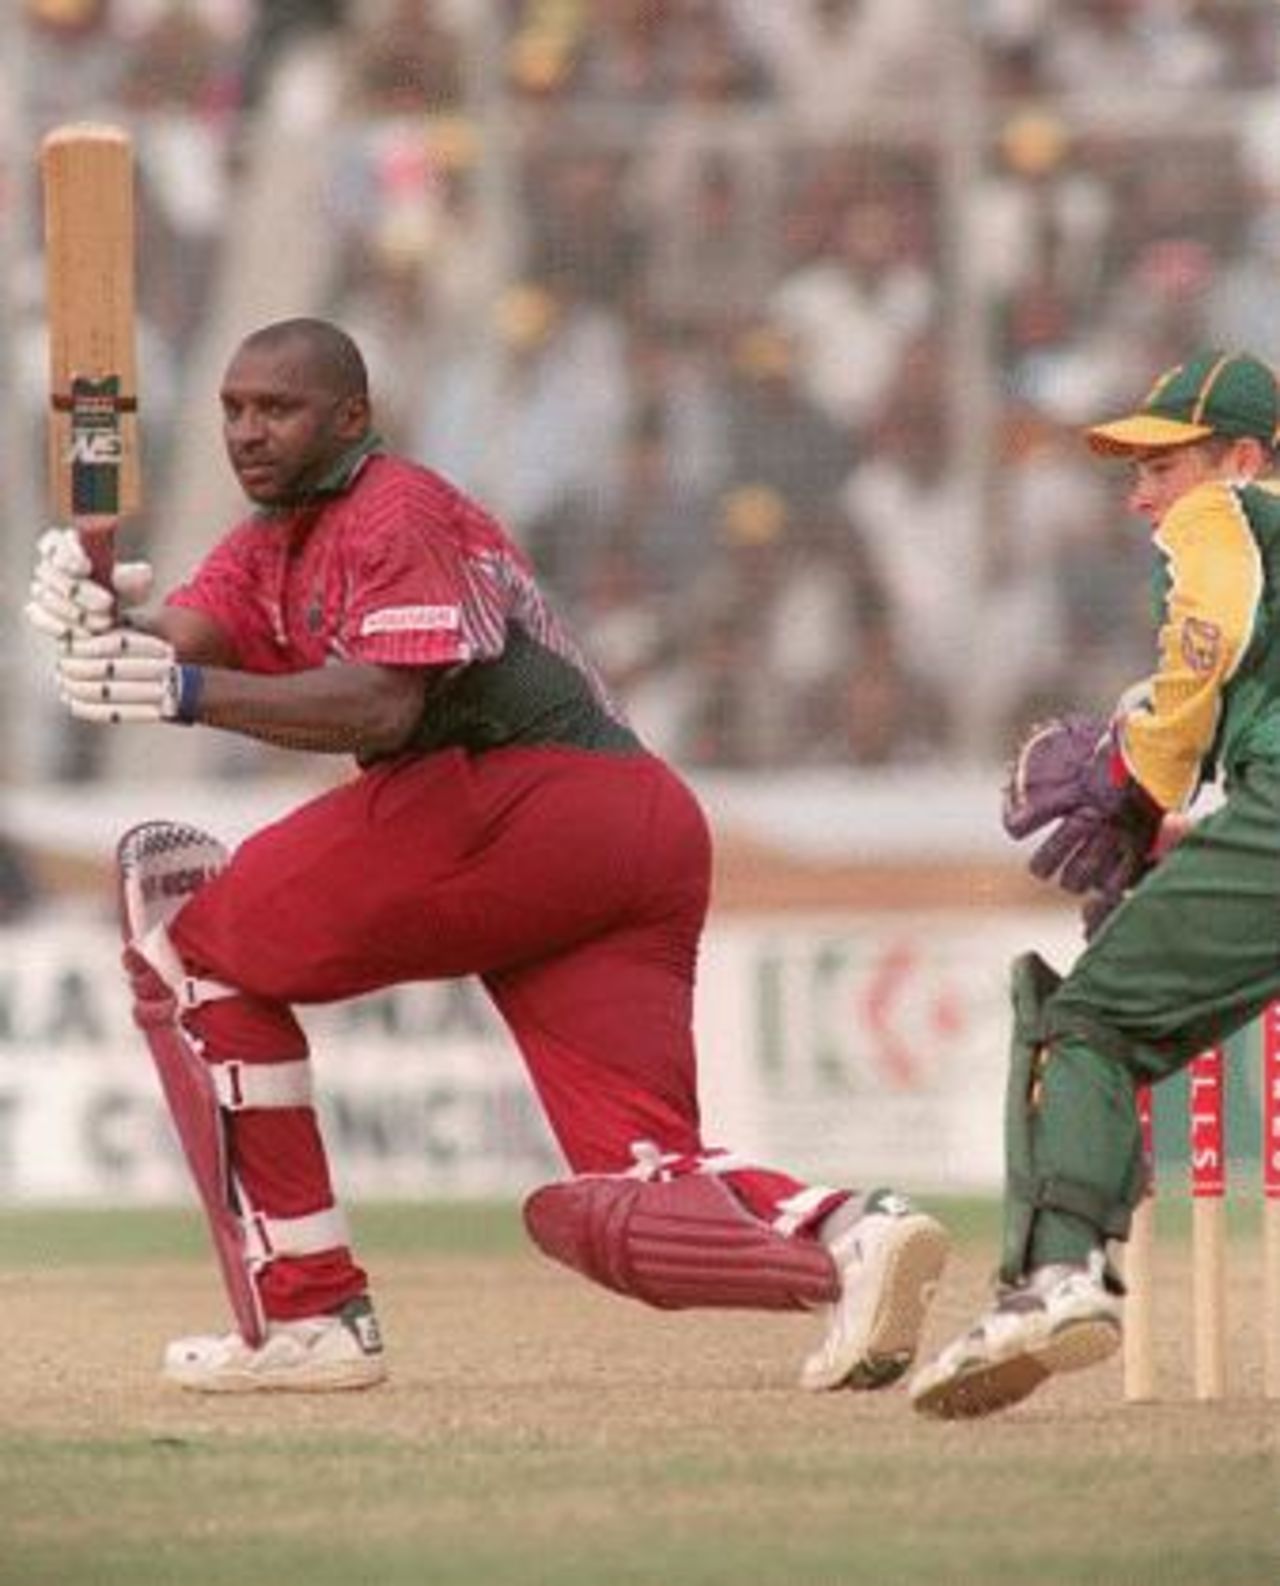 Wills International Cup, 1998/99, Final South Africa v West Indies Bangabandhu National Stadium, Dhaka  1 November 1998  Wallace hits to leg during his innings of 103 Boucher looks on